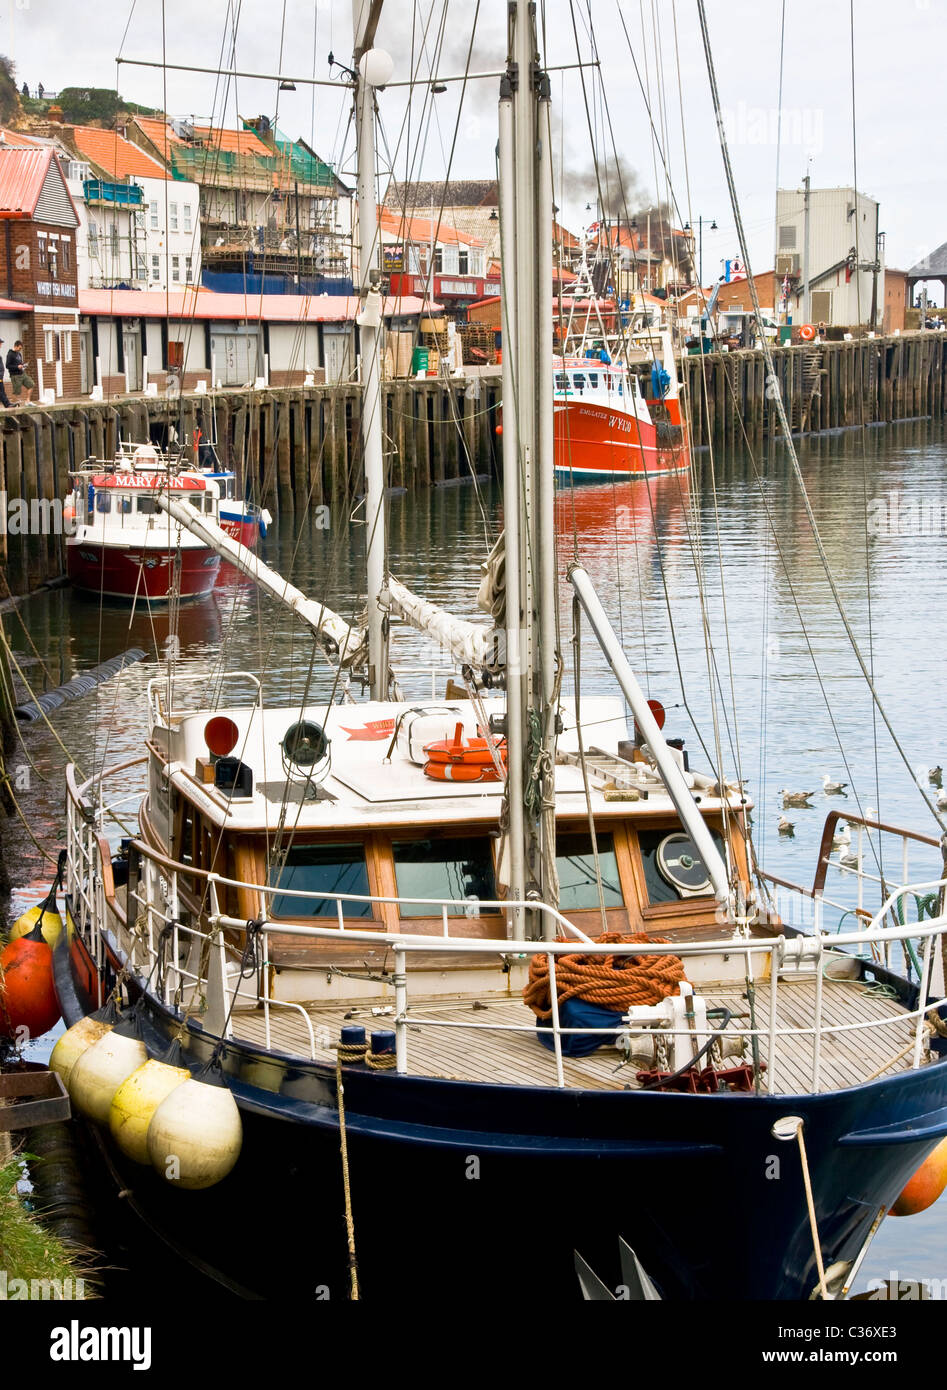 Fishing and sailing boats moored on the quayside Whitby north Yorkshire England Europe Stock Photo